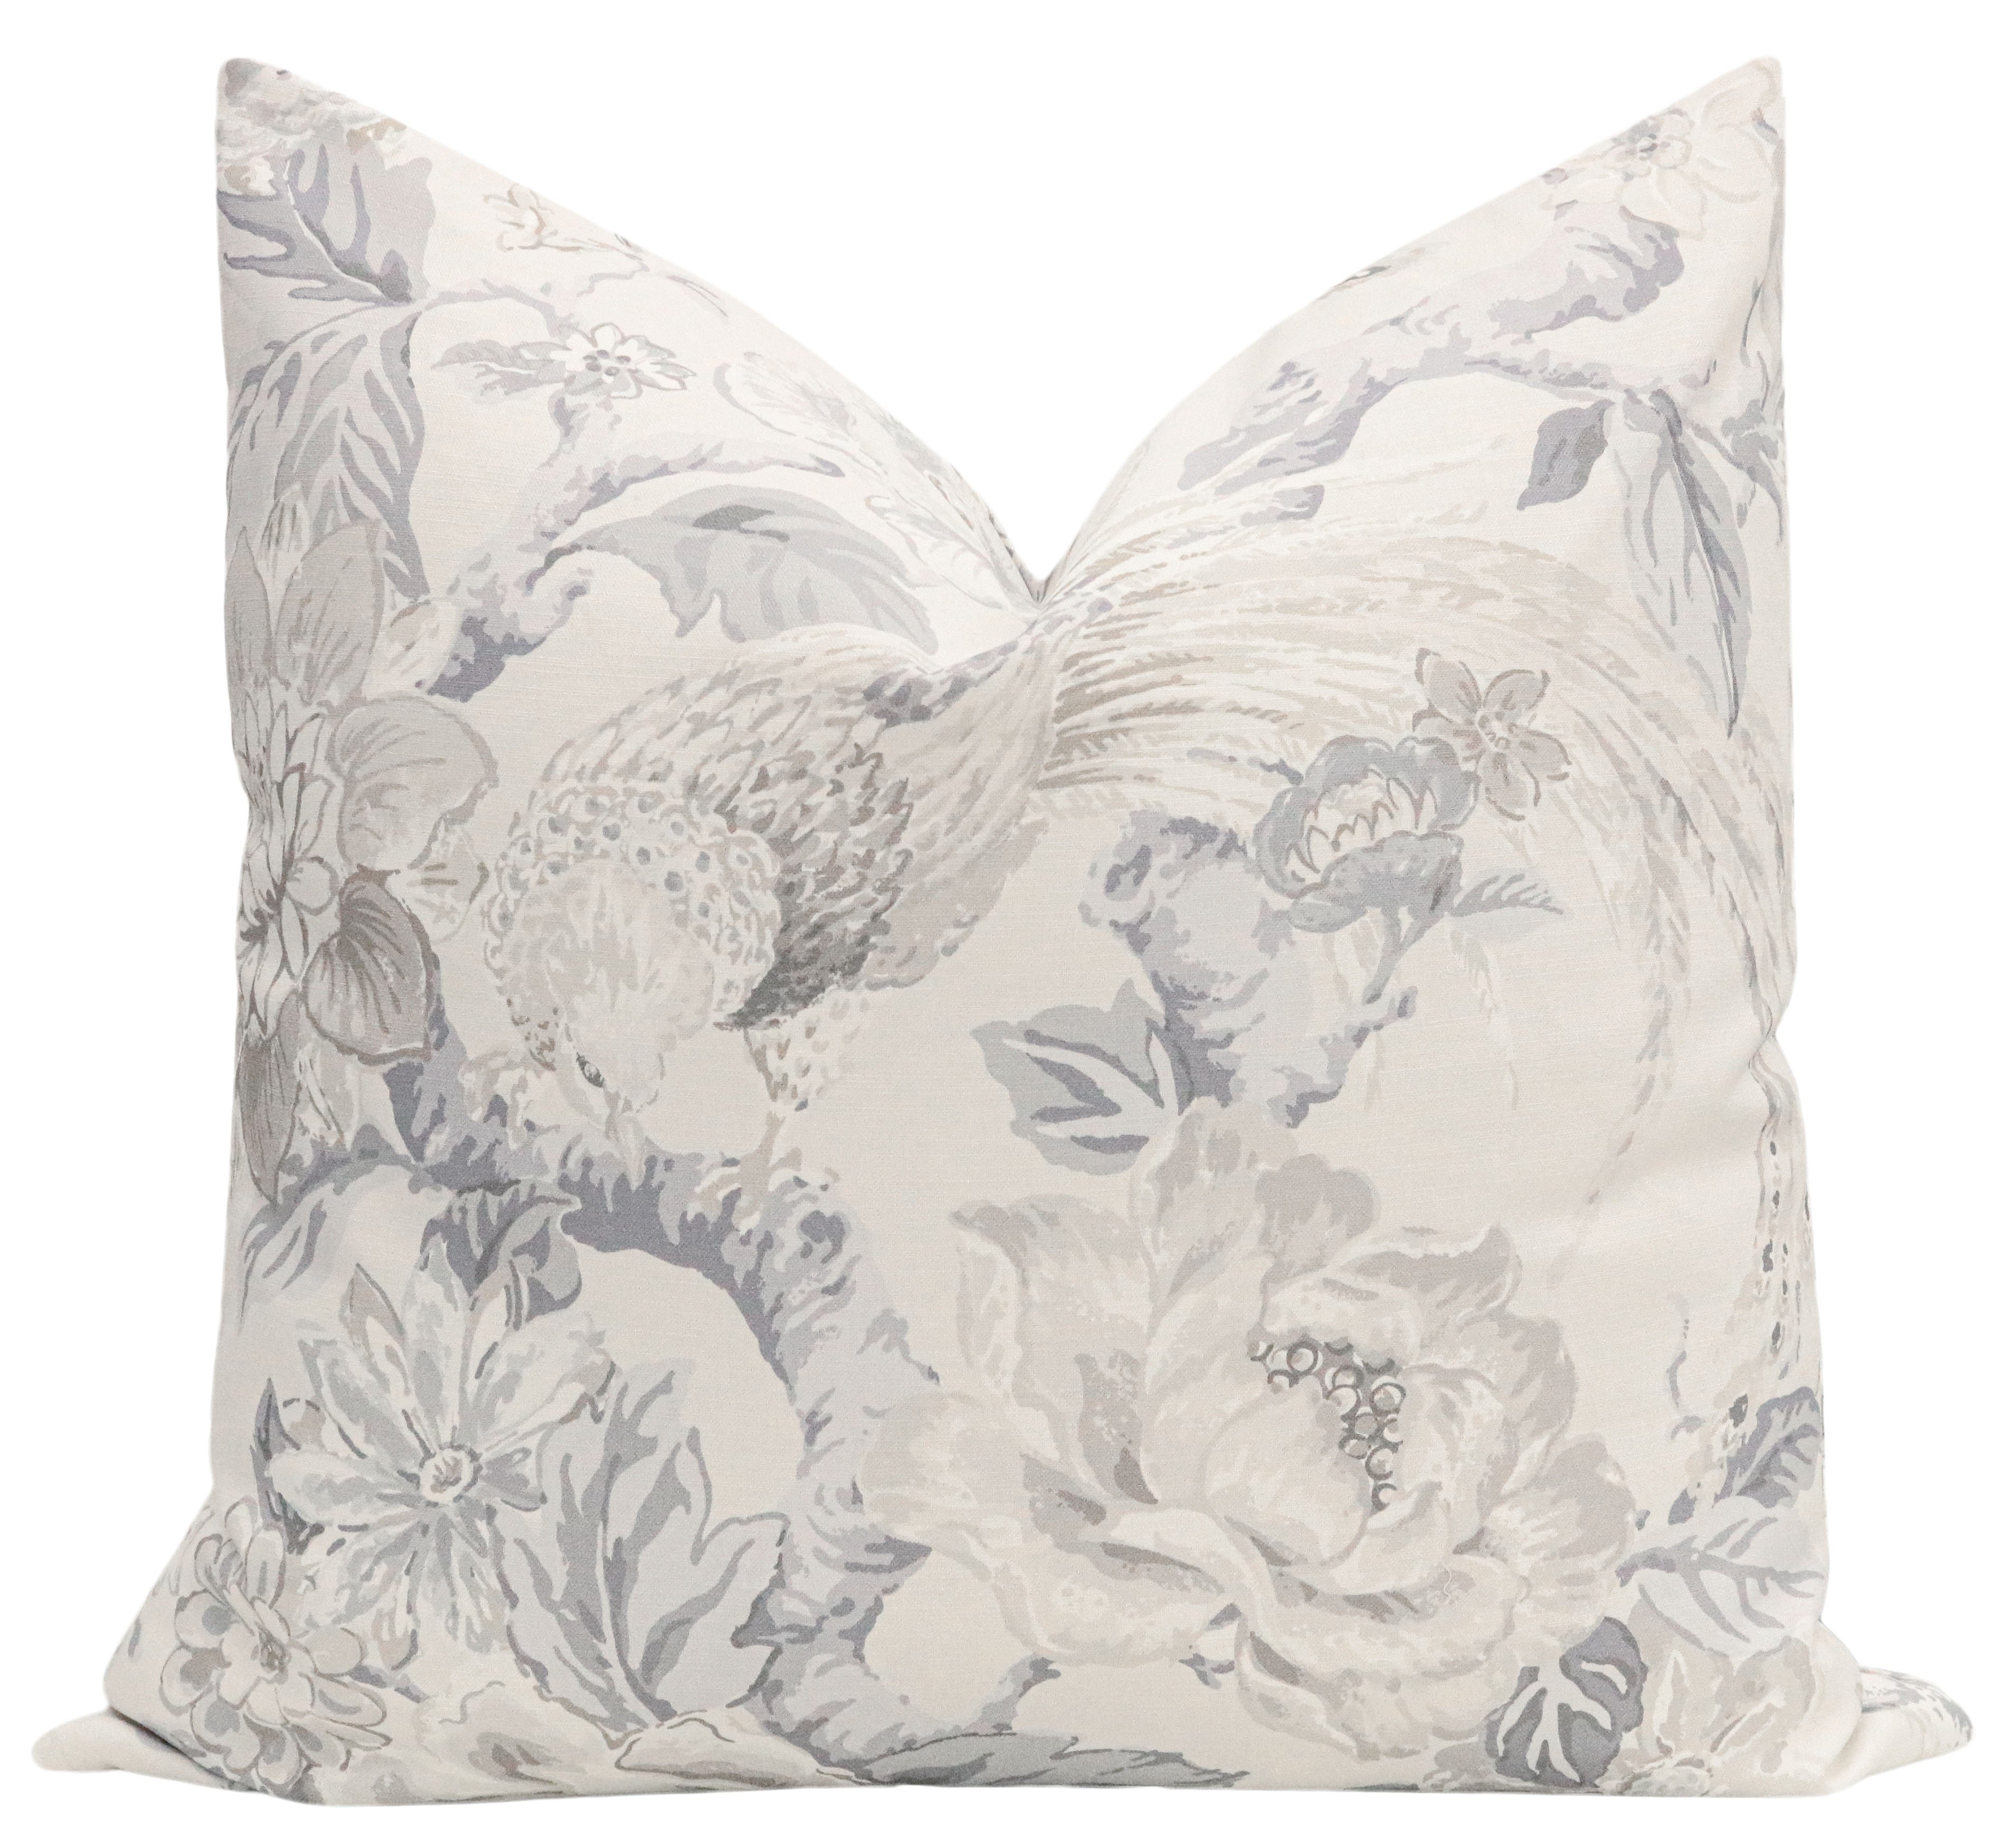 Floral Aviary Print Pillow Cover, Delft, 20" x 20" - Image 0